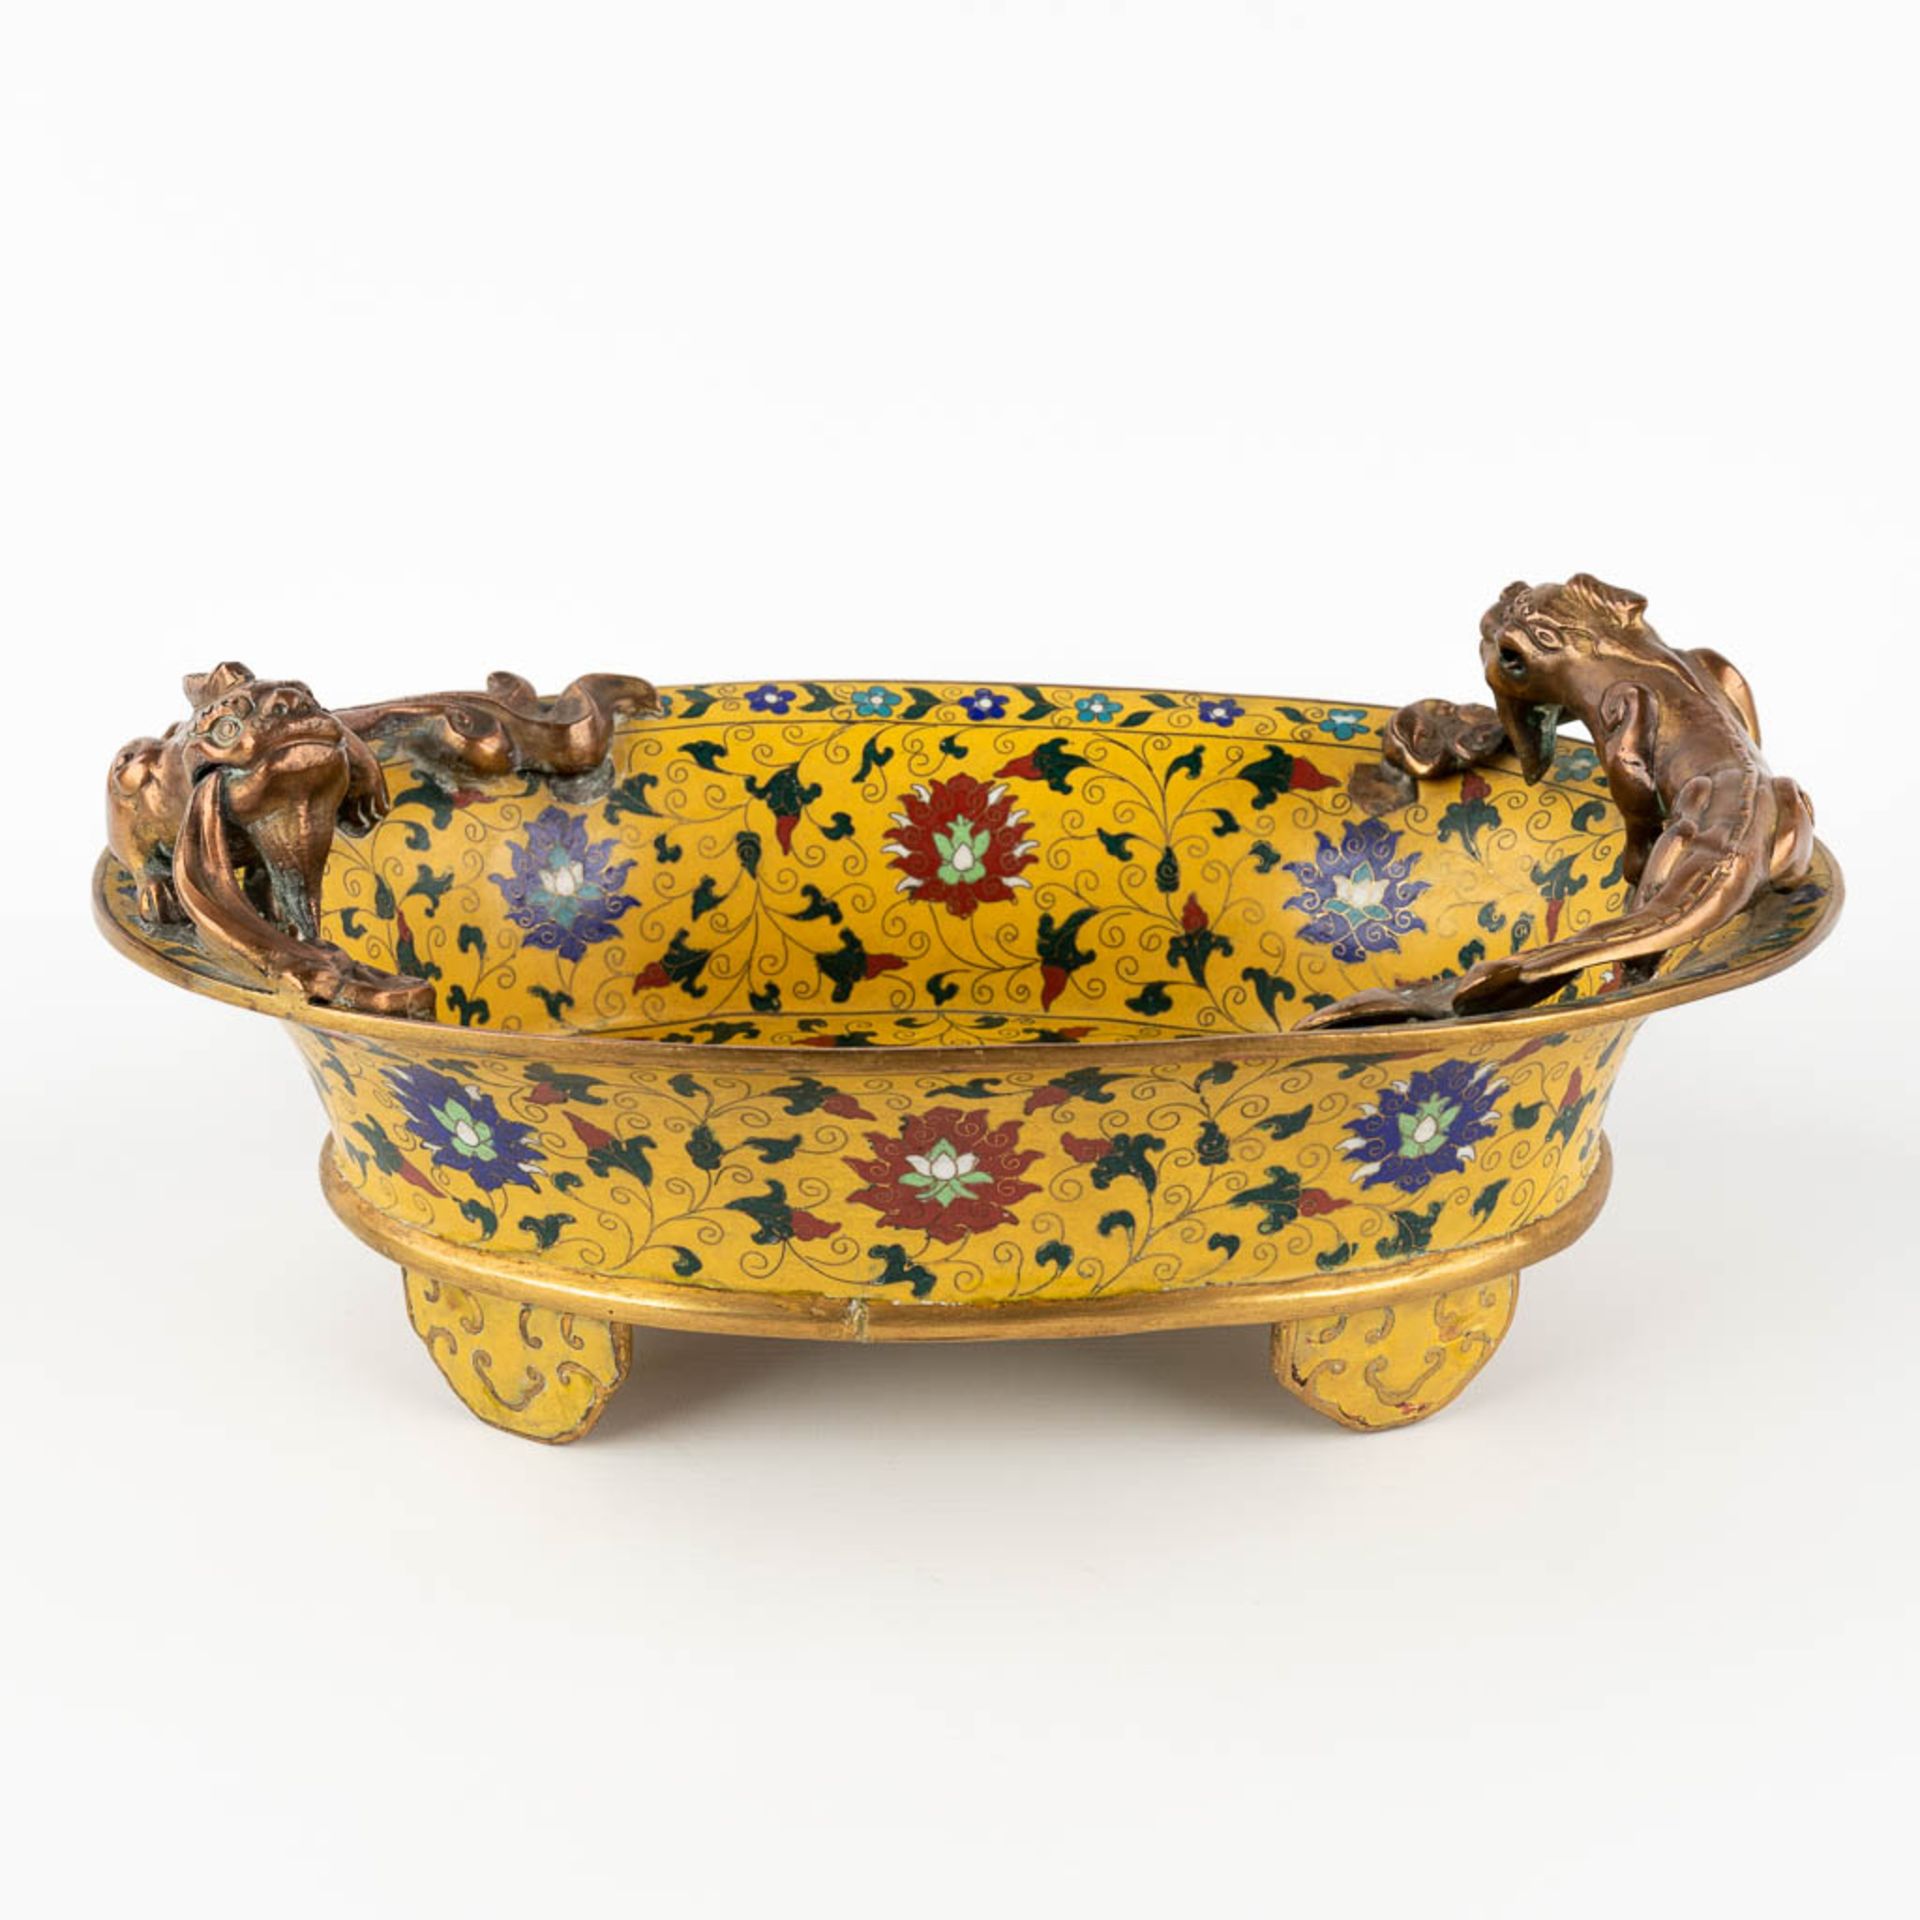 A Chinese cloisonné bronze bowl, mounted with dragons and finished with floral decor. (D:25,5 x W:36 - Image 5 of 13